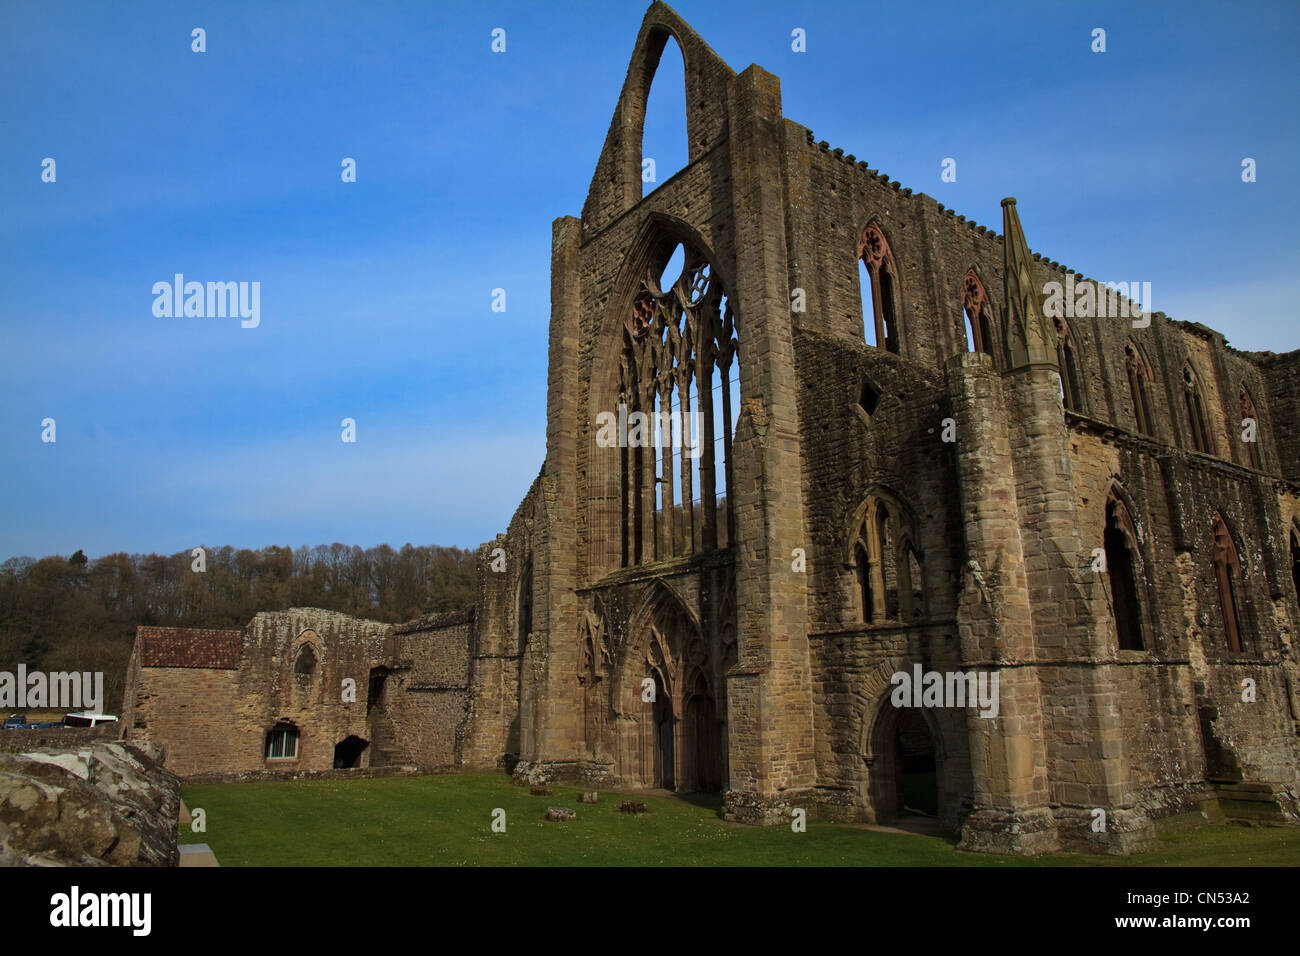 Abbaye de Tintern, Monmouthshire, Wales, une abbaye cistercienne Banque D'Images